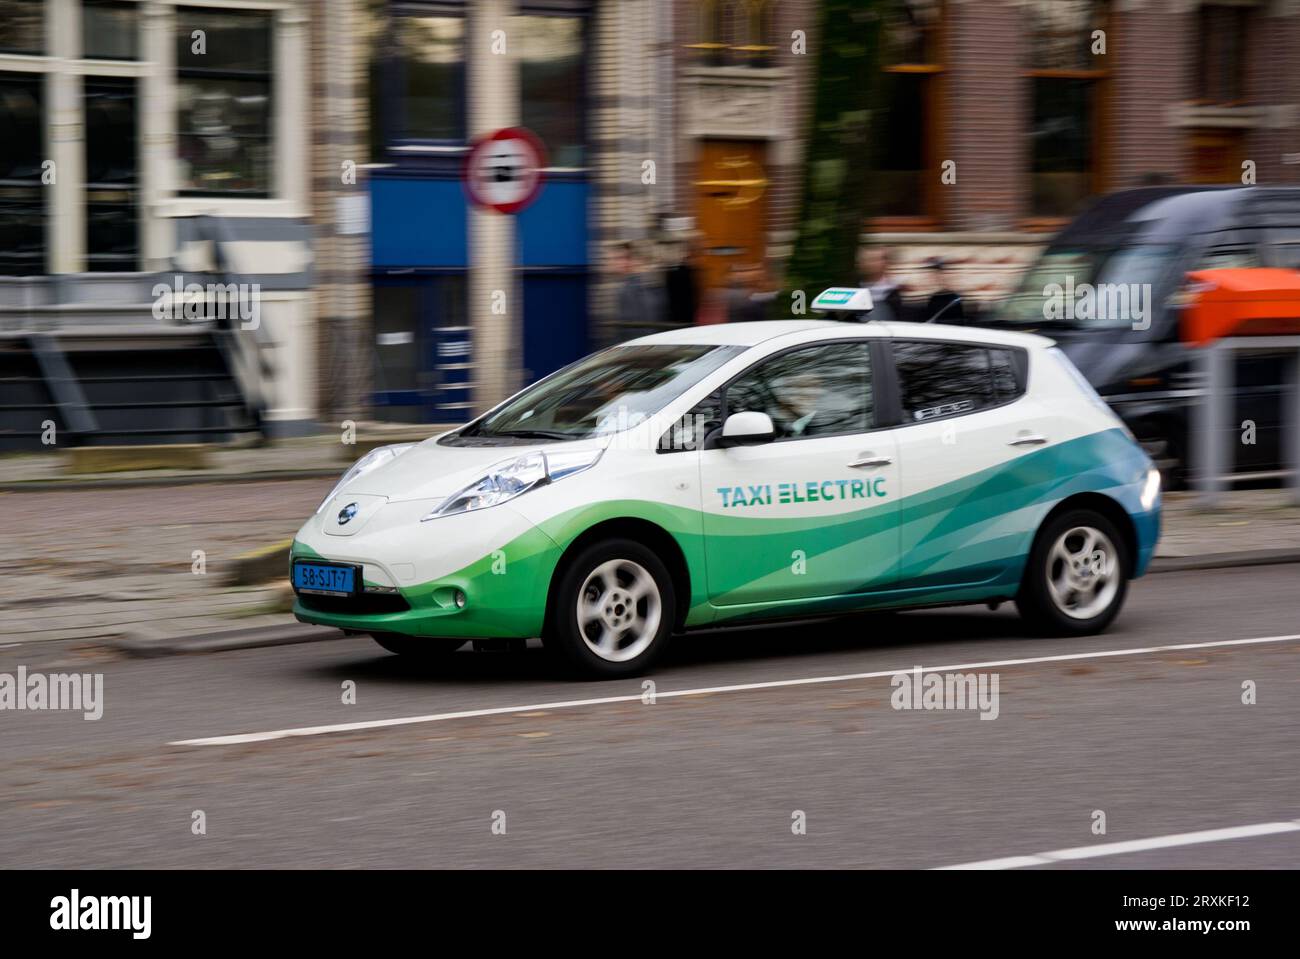 AMSTERDAM, NETHERLANDS - NOVEMBER 8, 2013: Japanese Nissan Leaf electrical taxi car in Amsterdam, Netherlands. There are 25 of these electrical taxis Stock Photo